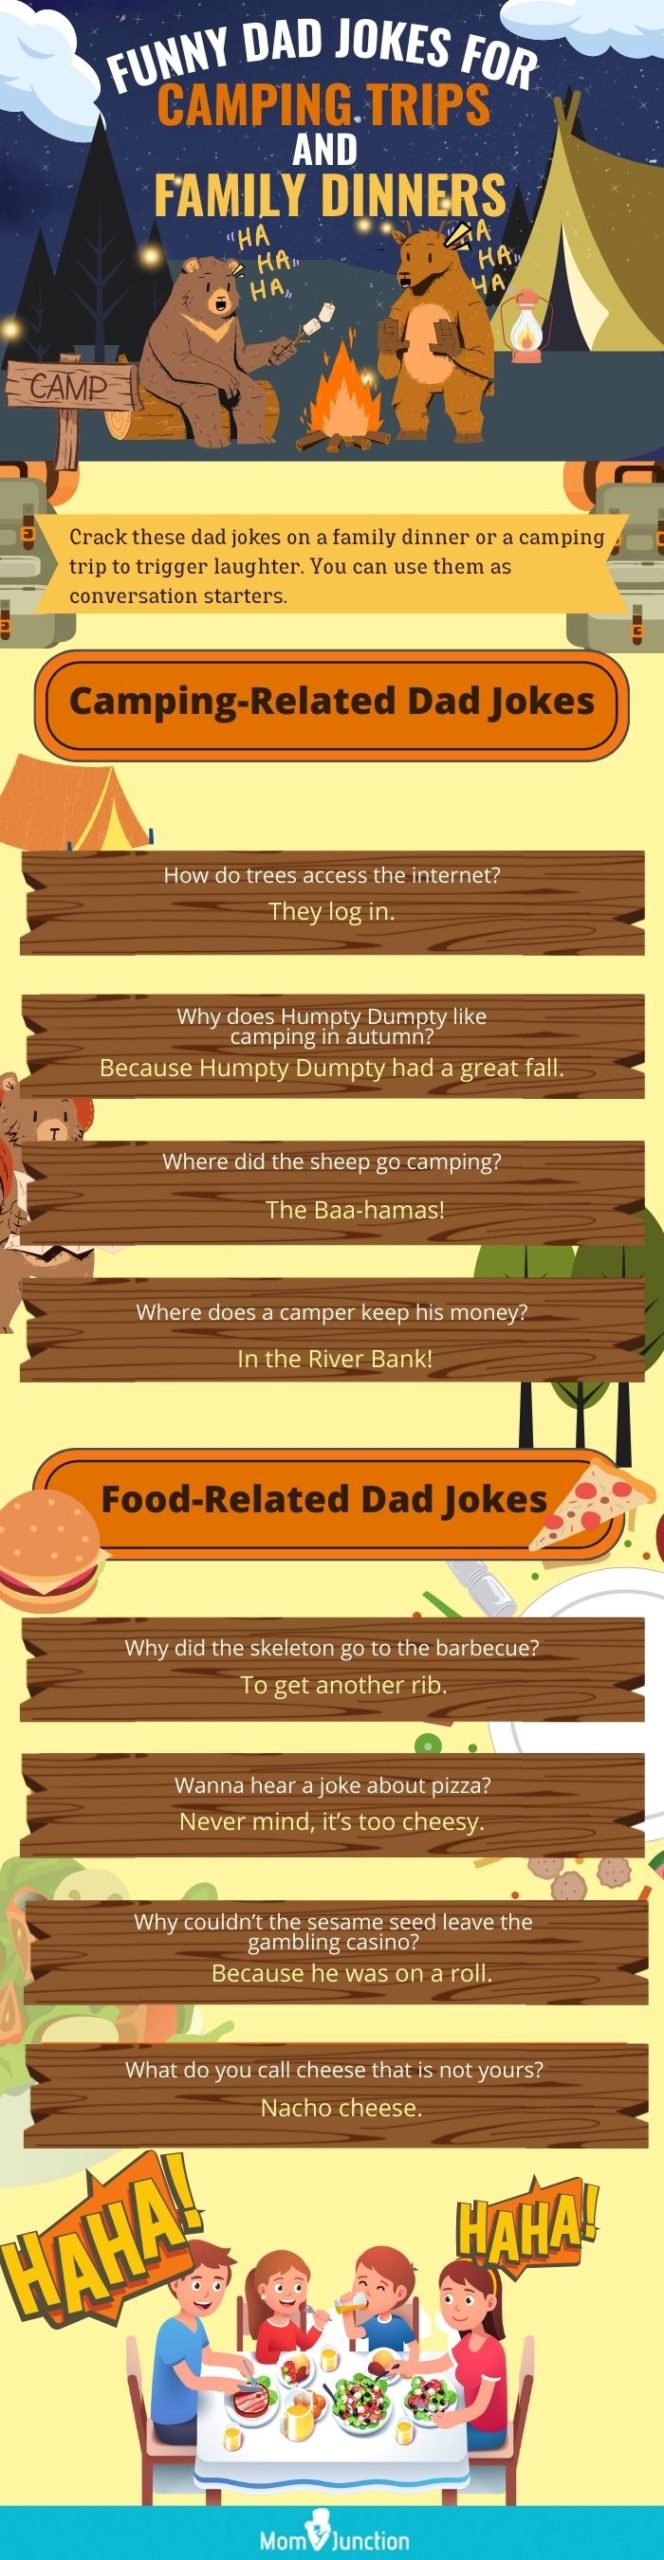 dad jokes for camping and mealtimes [infographic]